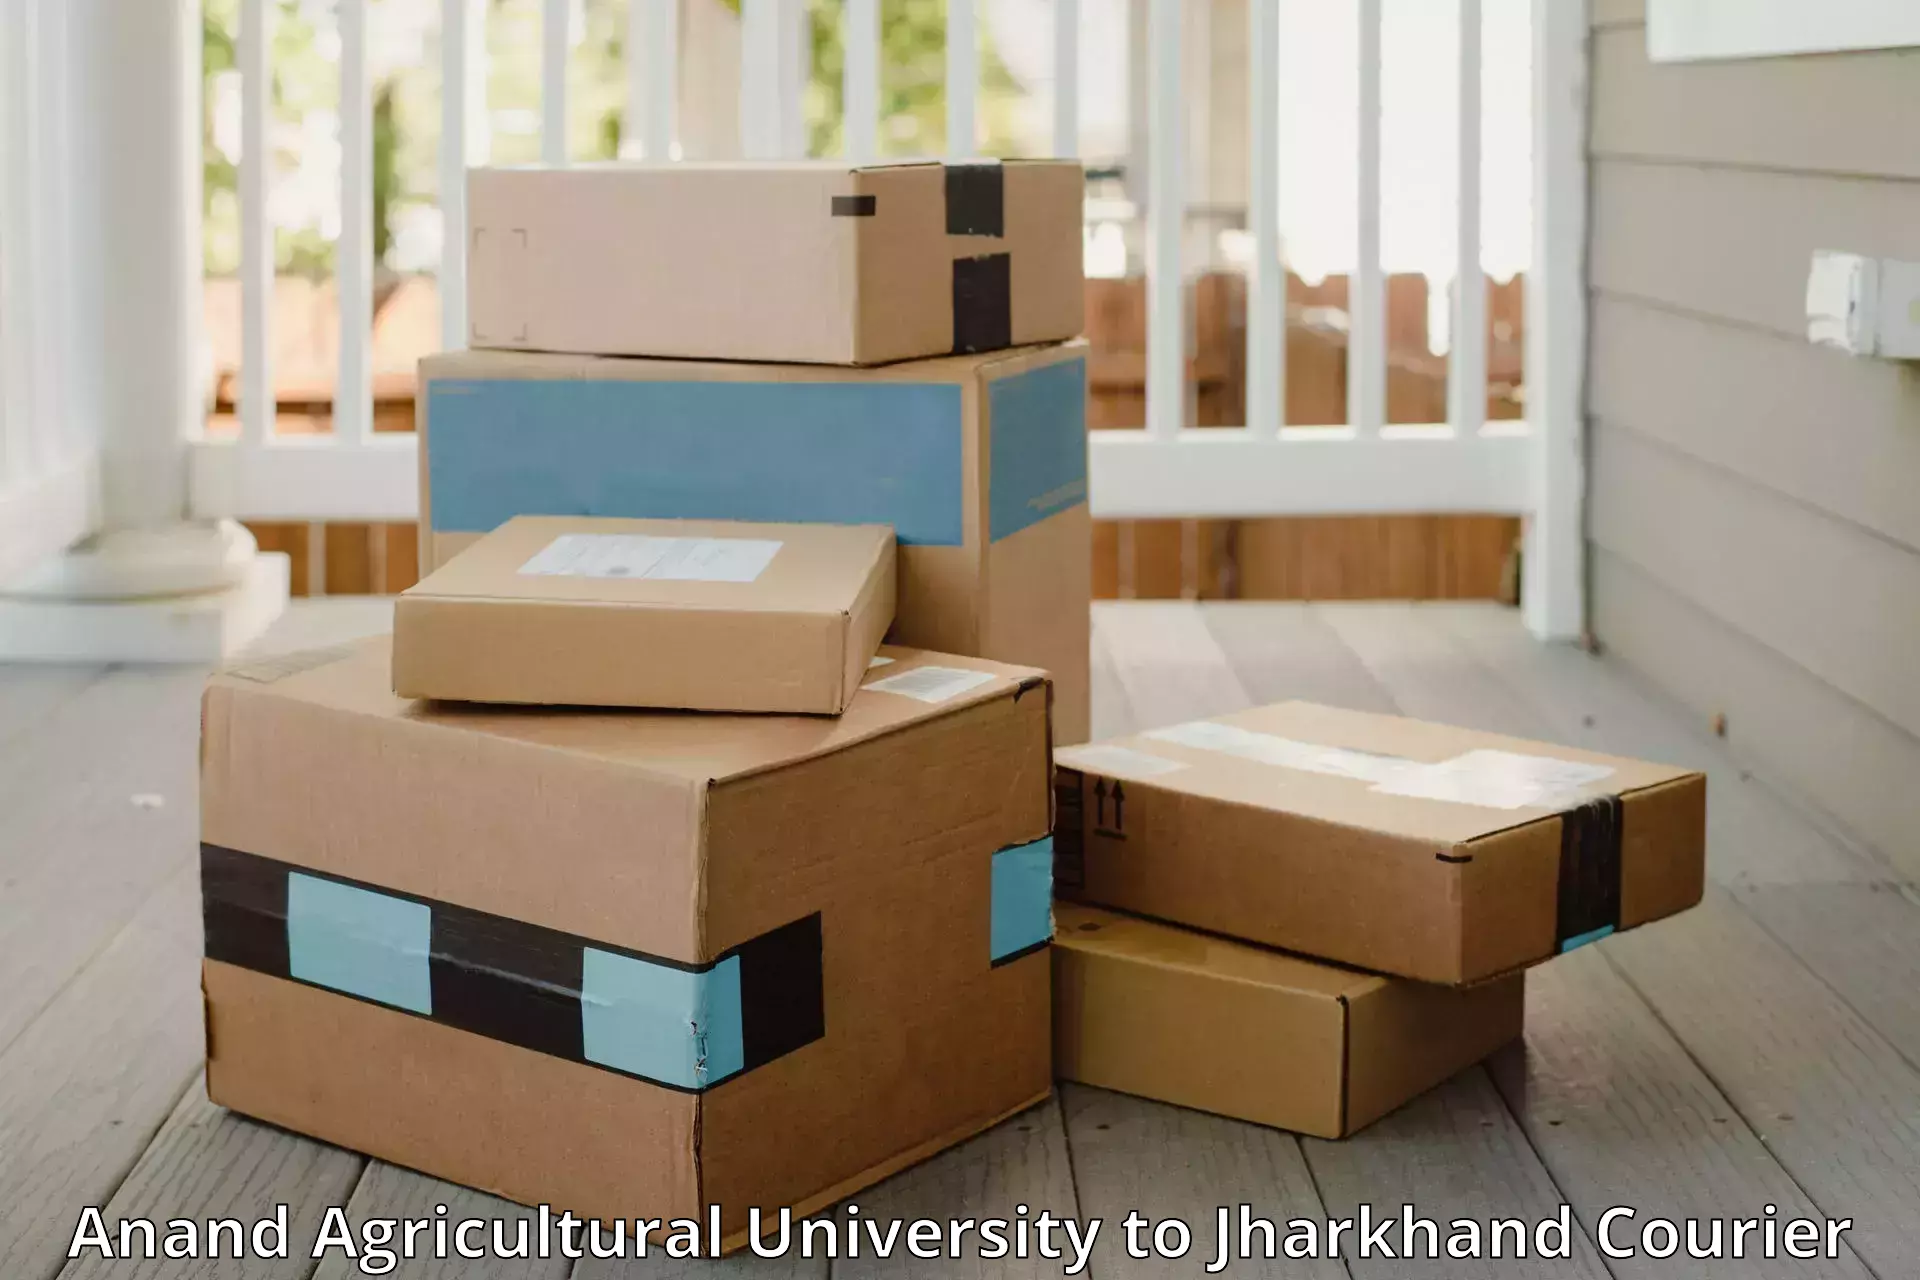 Door to door luggage delivery Anand Agricultural University to Jharkhand